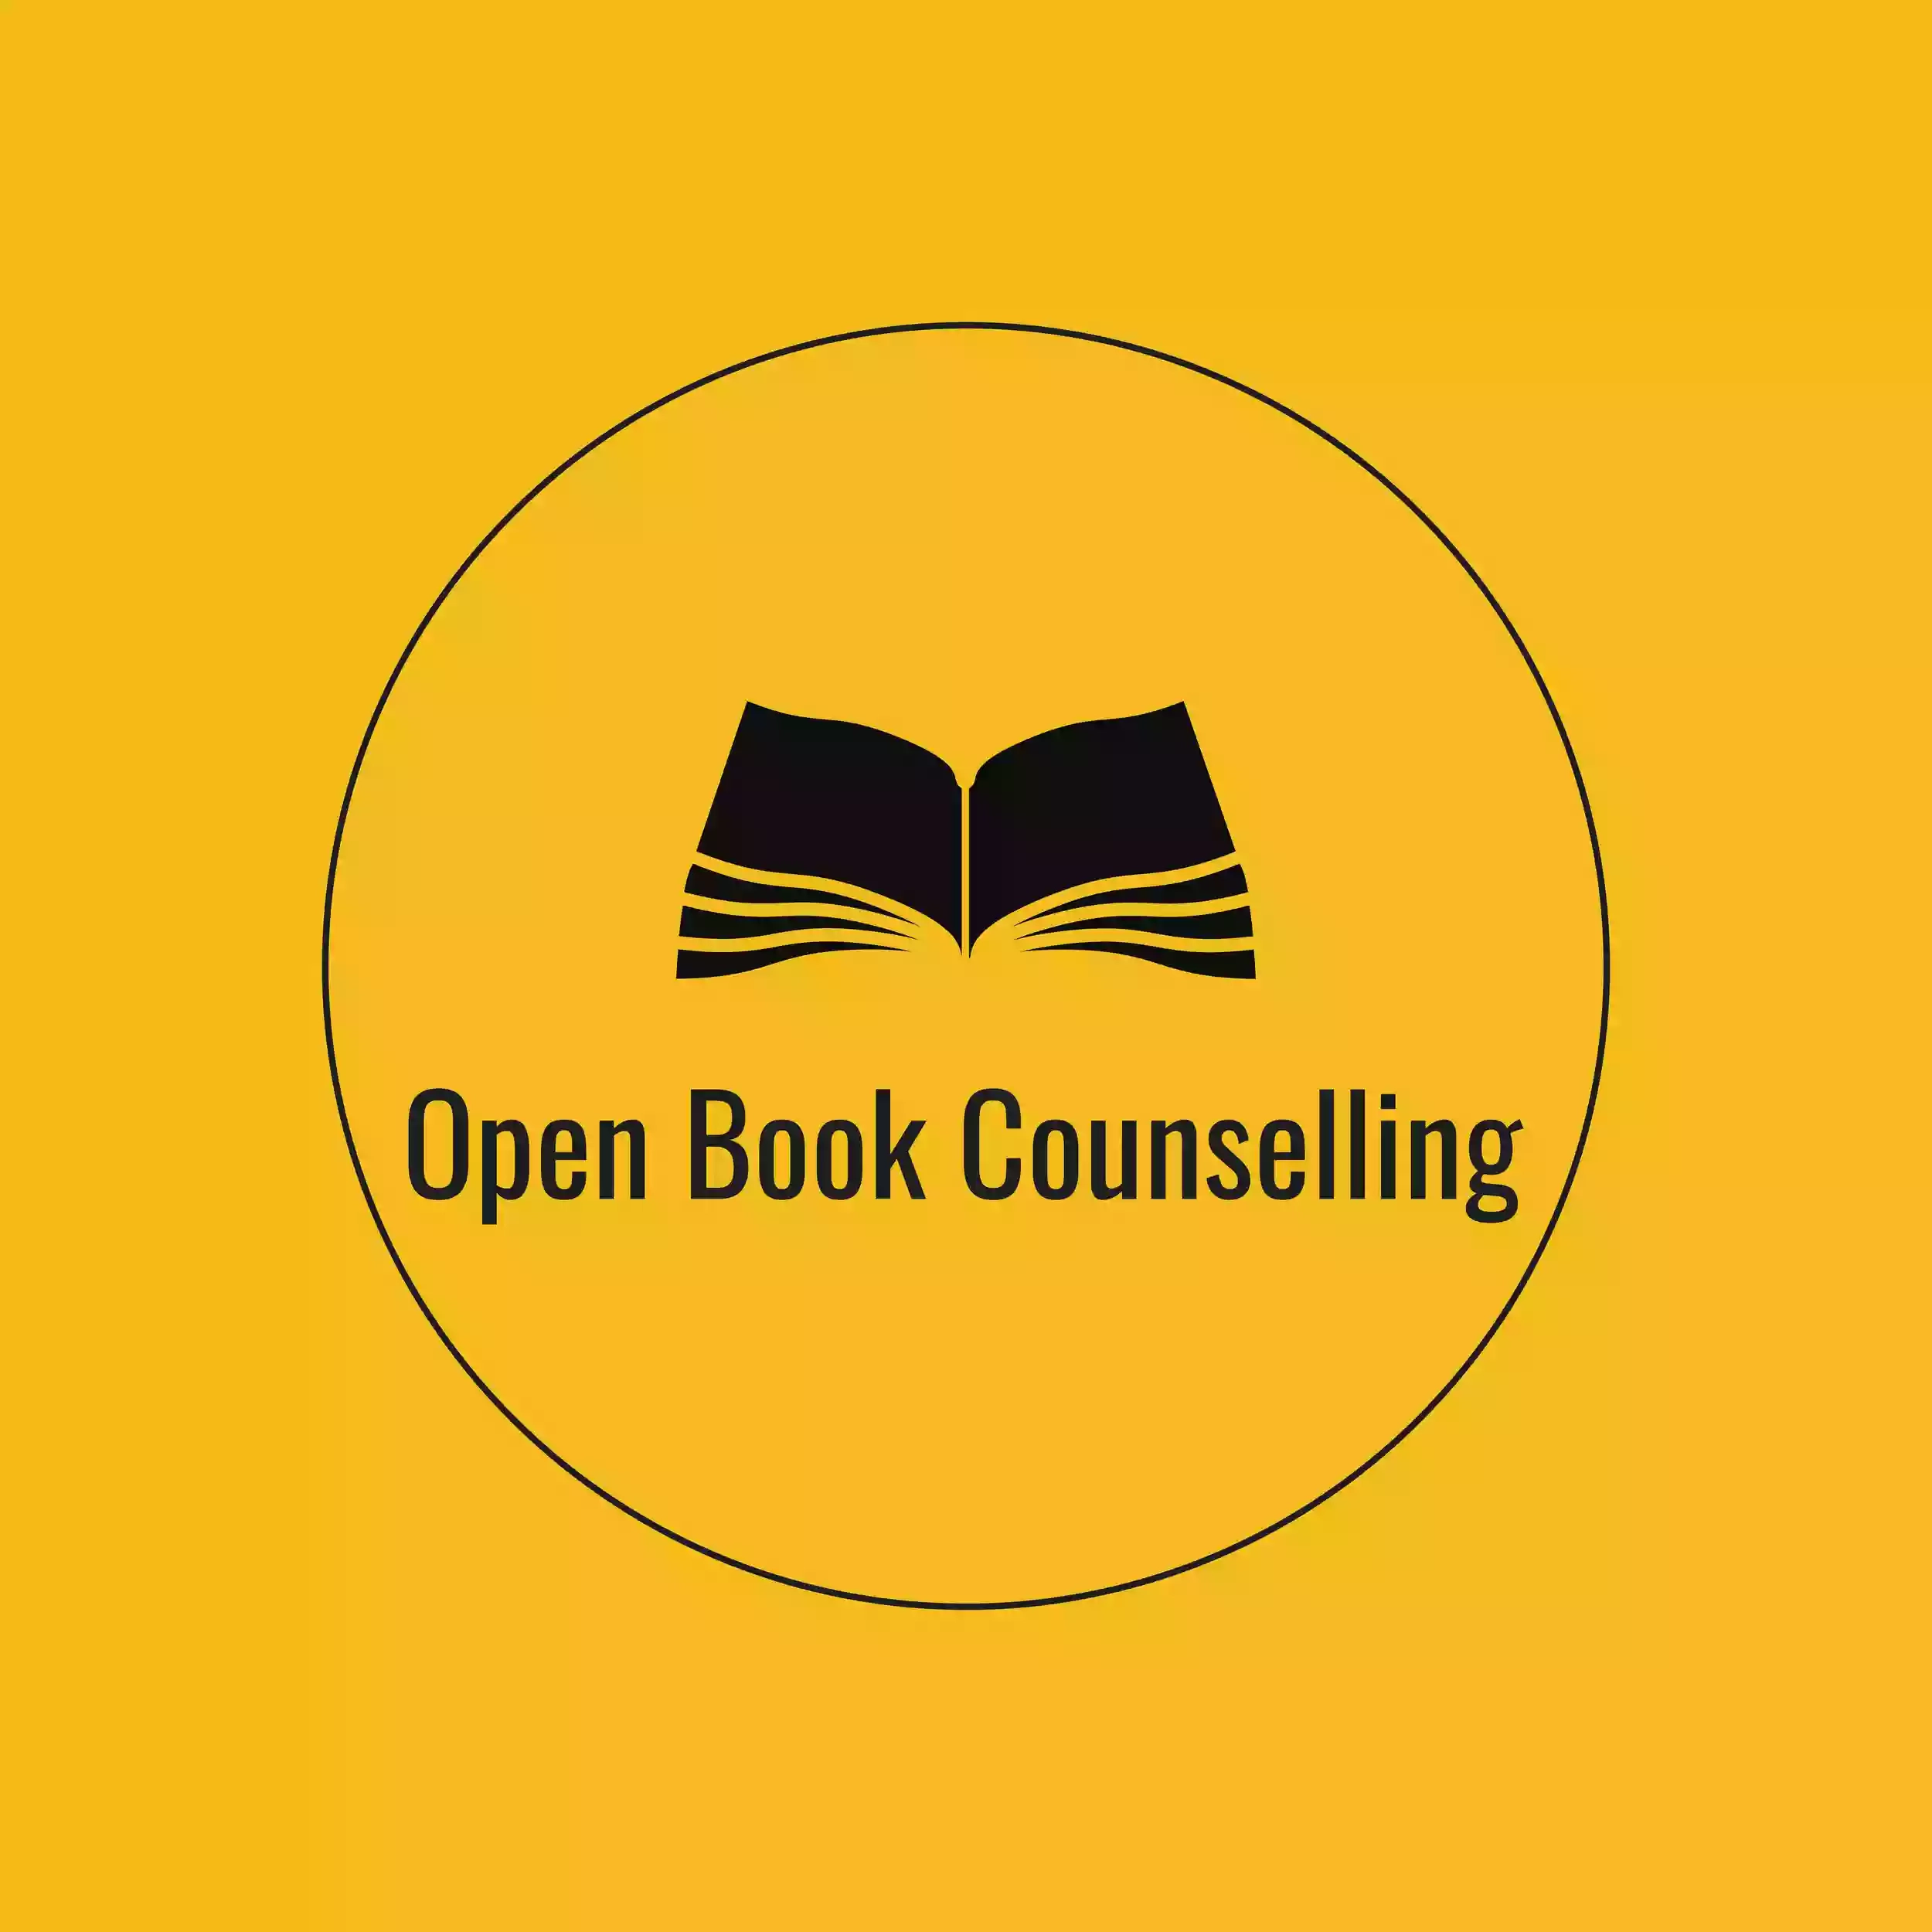 OPEN BOOK COUNSELLING